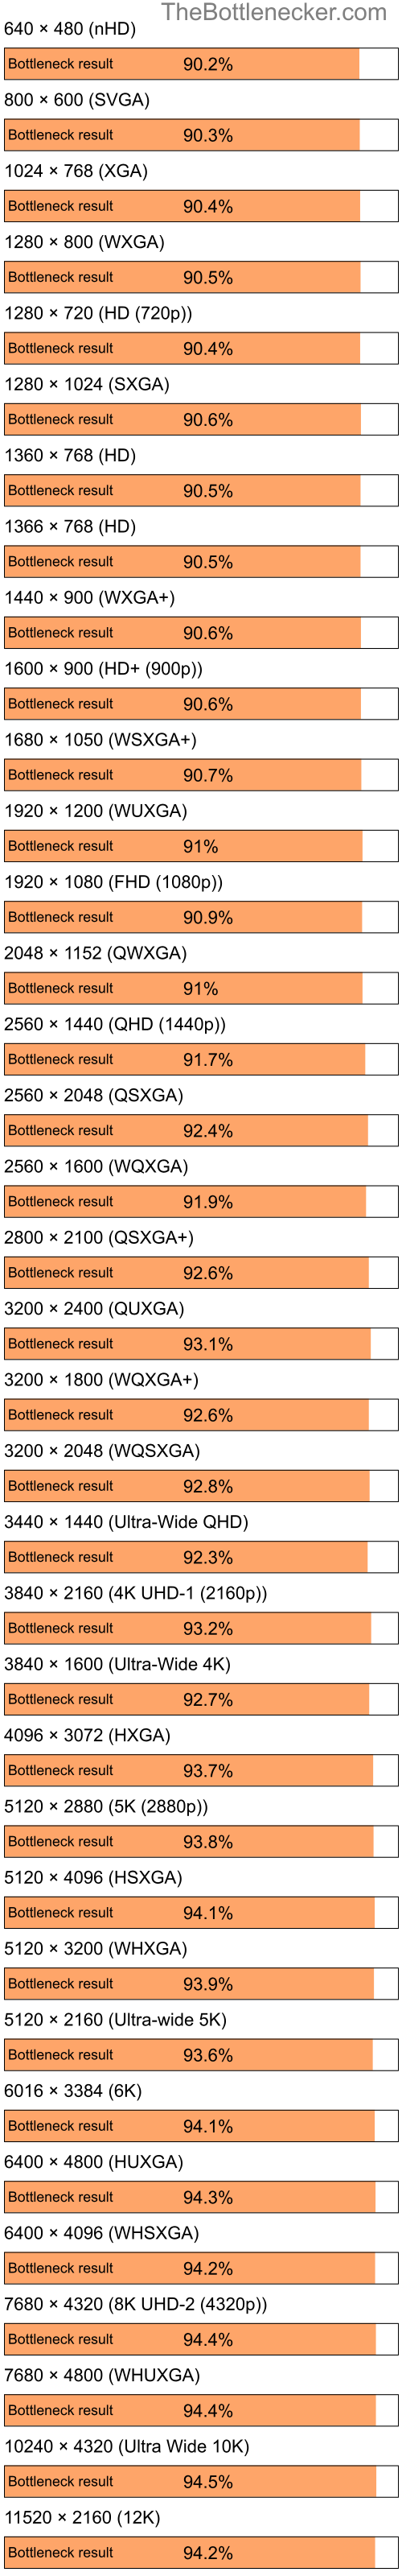 Bottleneck results by resolution for Intel Pentium 4 and NVIDIA MX 400 in General Tasks